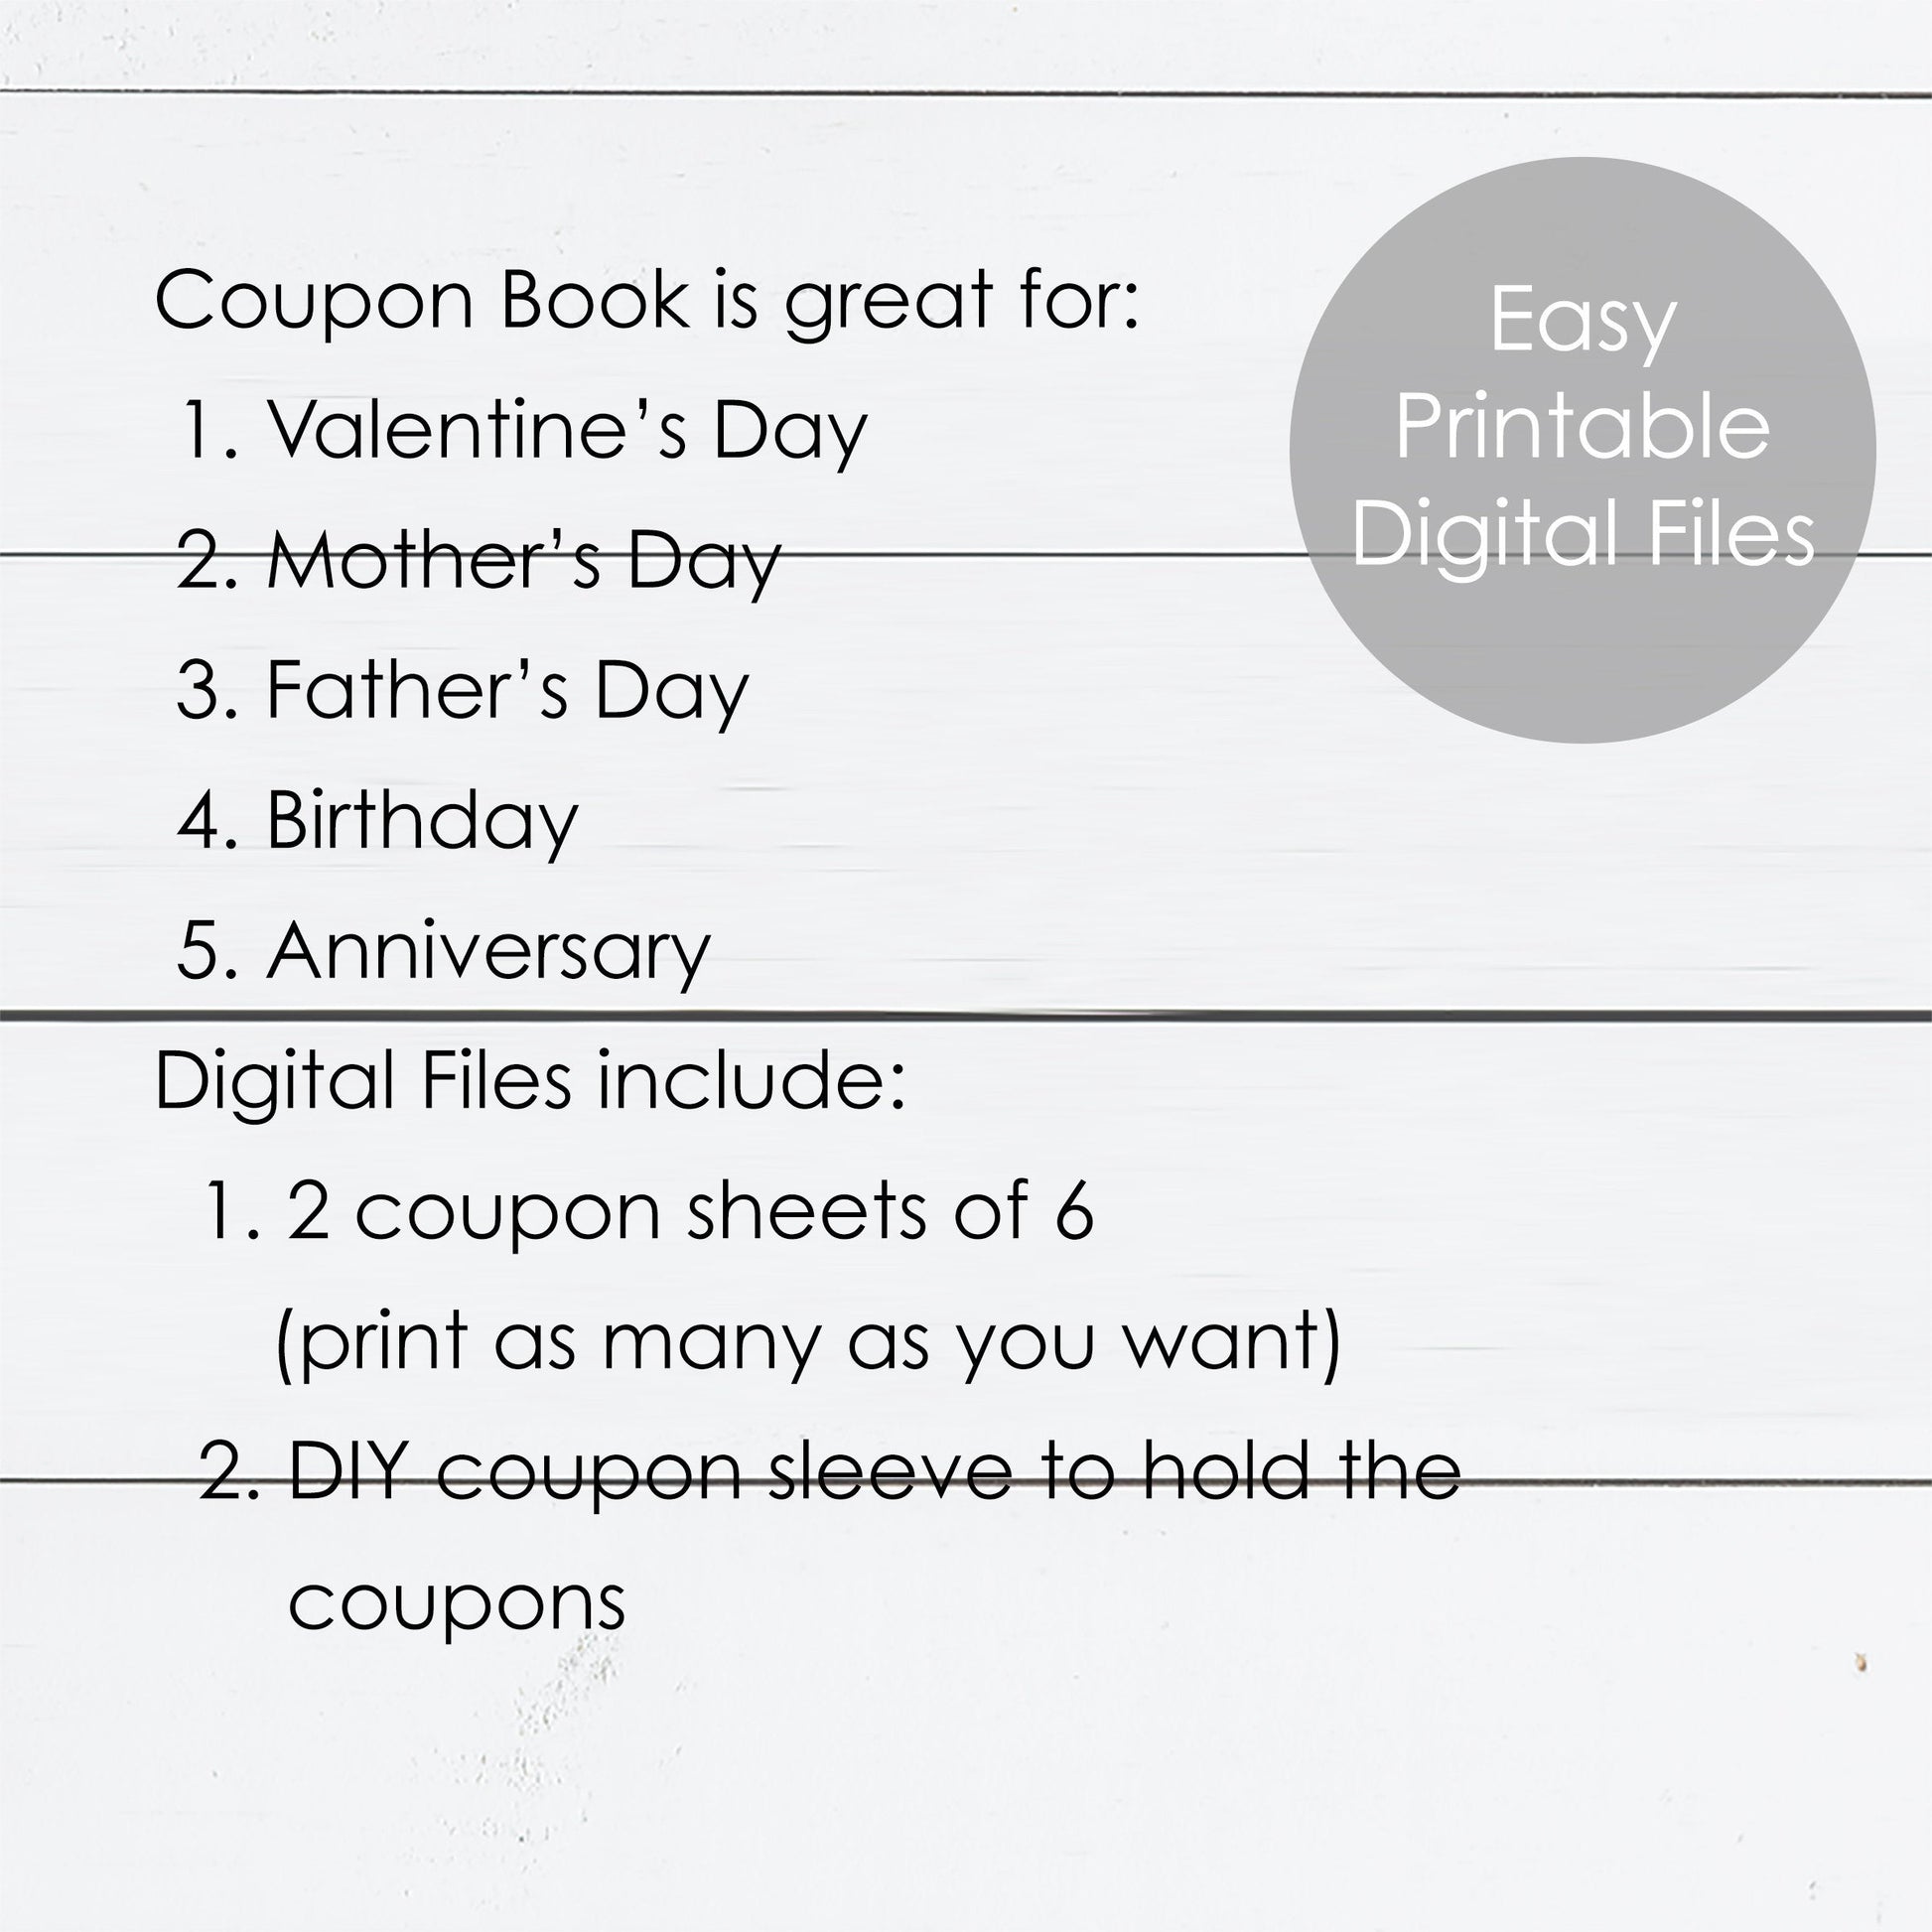 Coupon Book, Coupon Book Printable, Coupon Cards, Love Coupons, Valentines Day, Valentines Day Coupons, Anniversary, First Anniversary